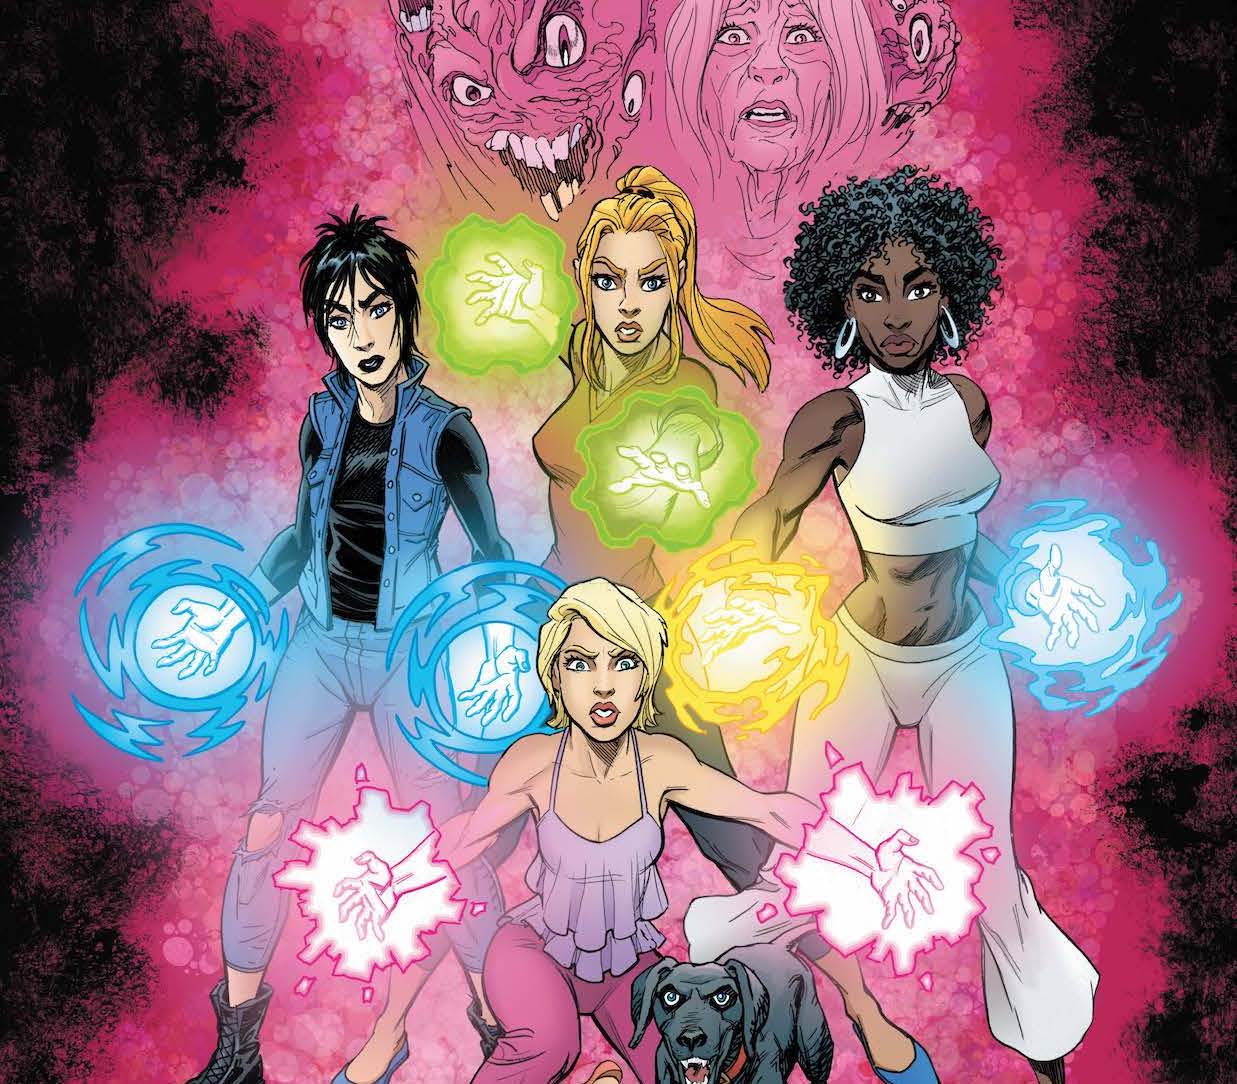 EXCLUSIVE AfterShock Preview: Girls of Dimension 13